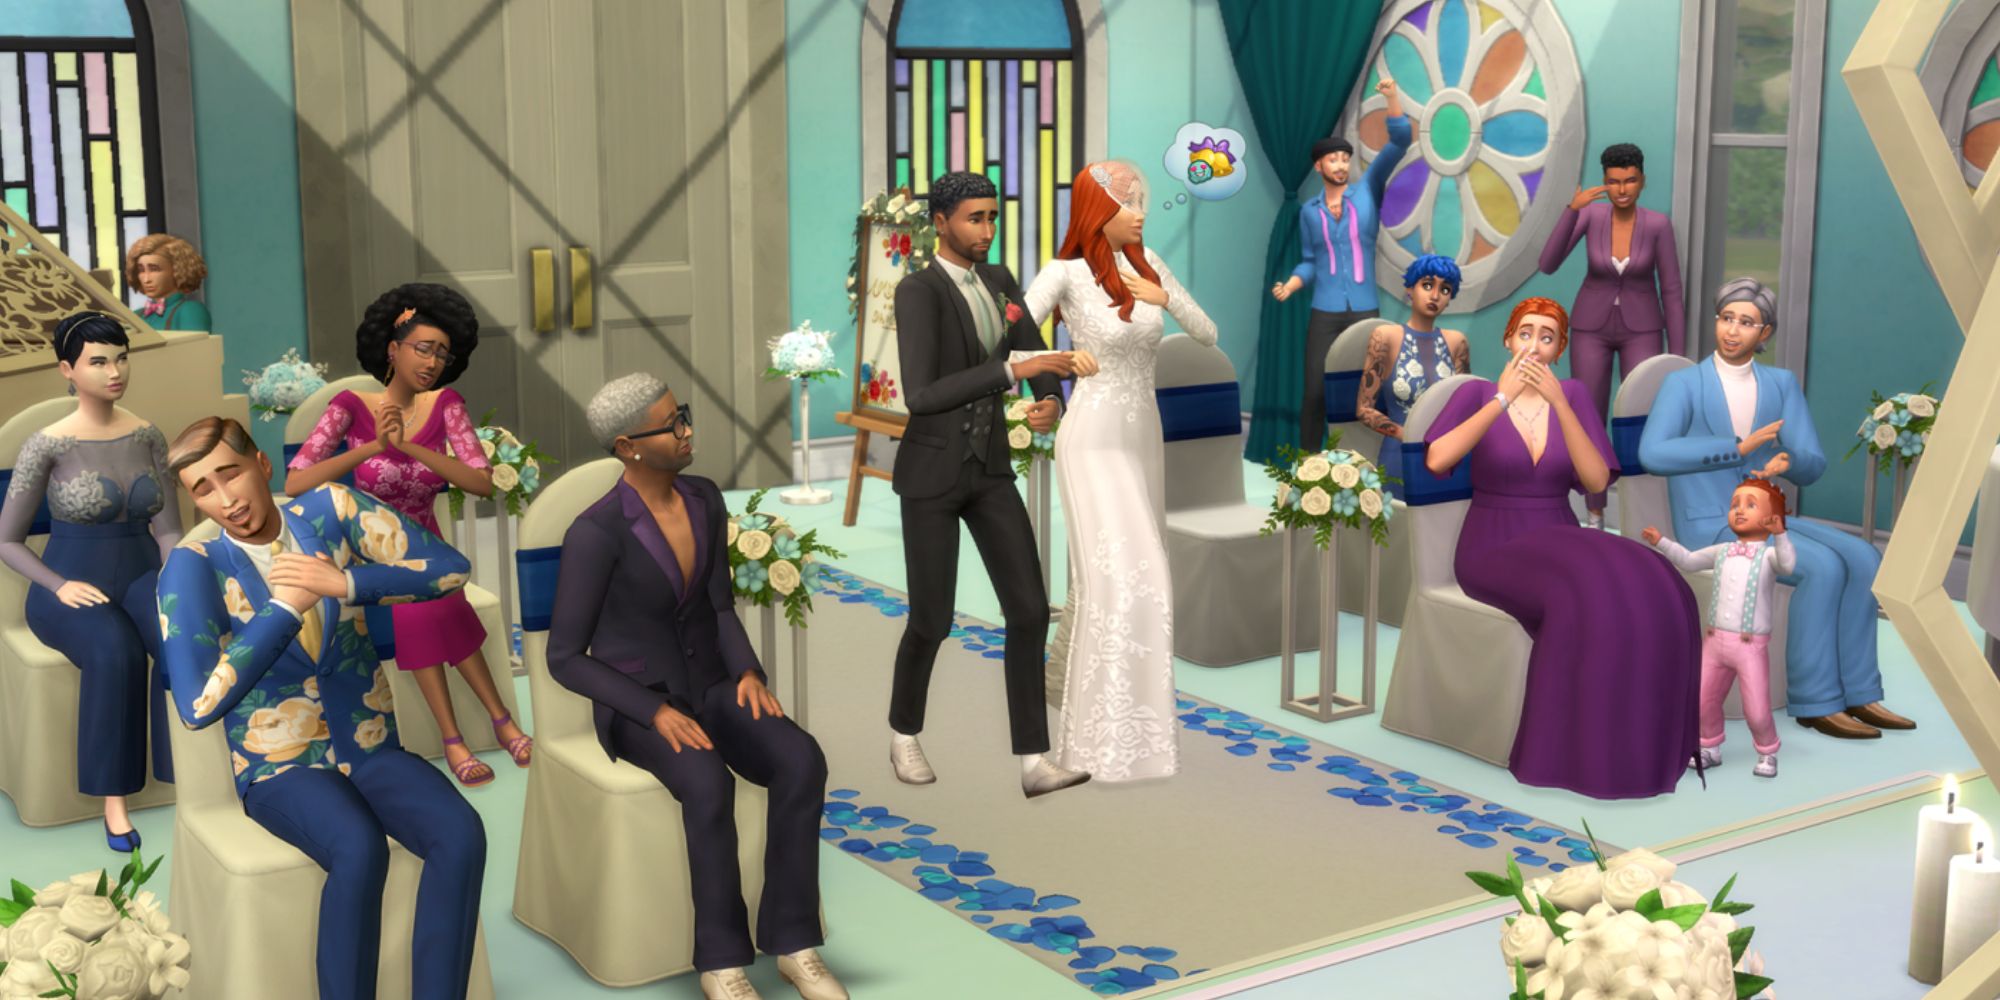 Sims 4 wedding ceremony with a sim walking down the aisle